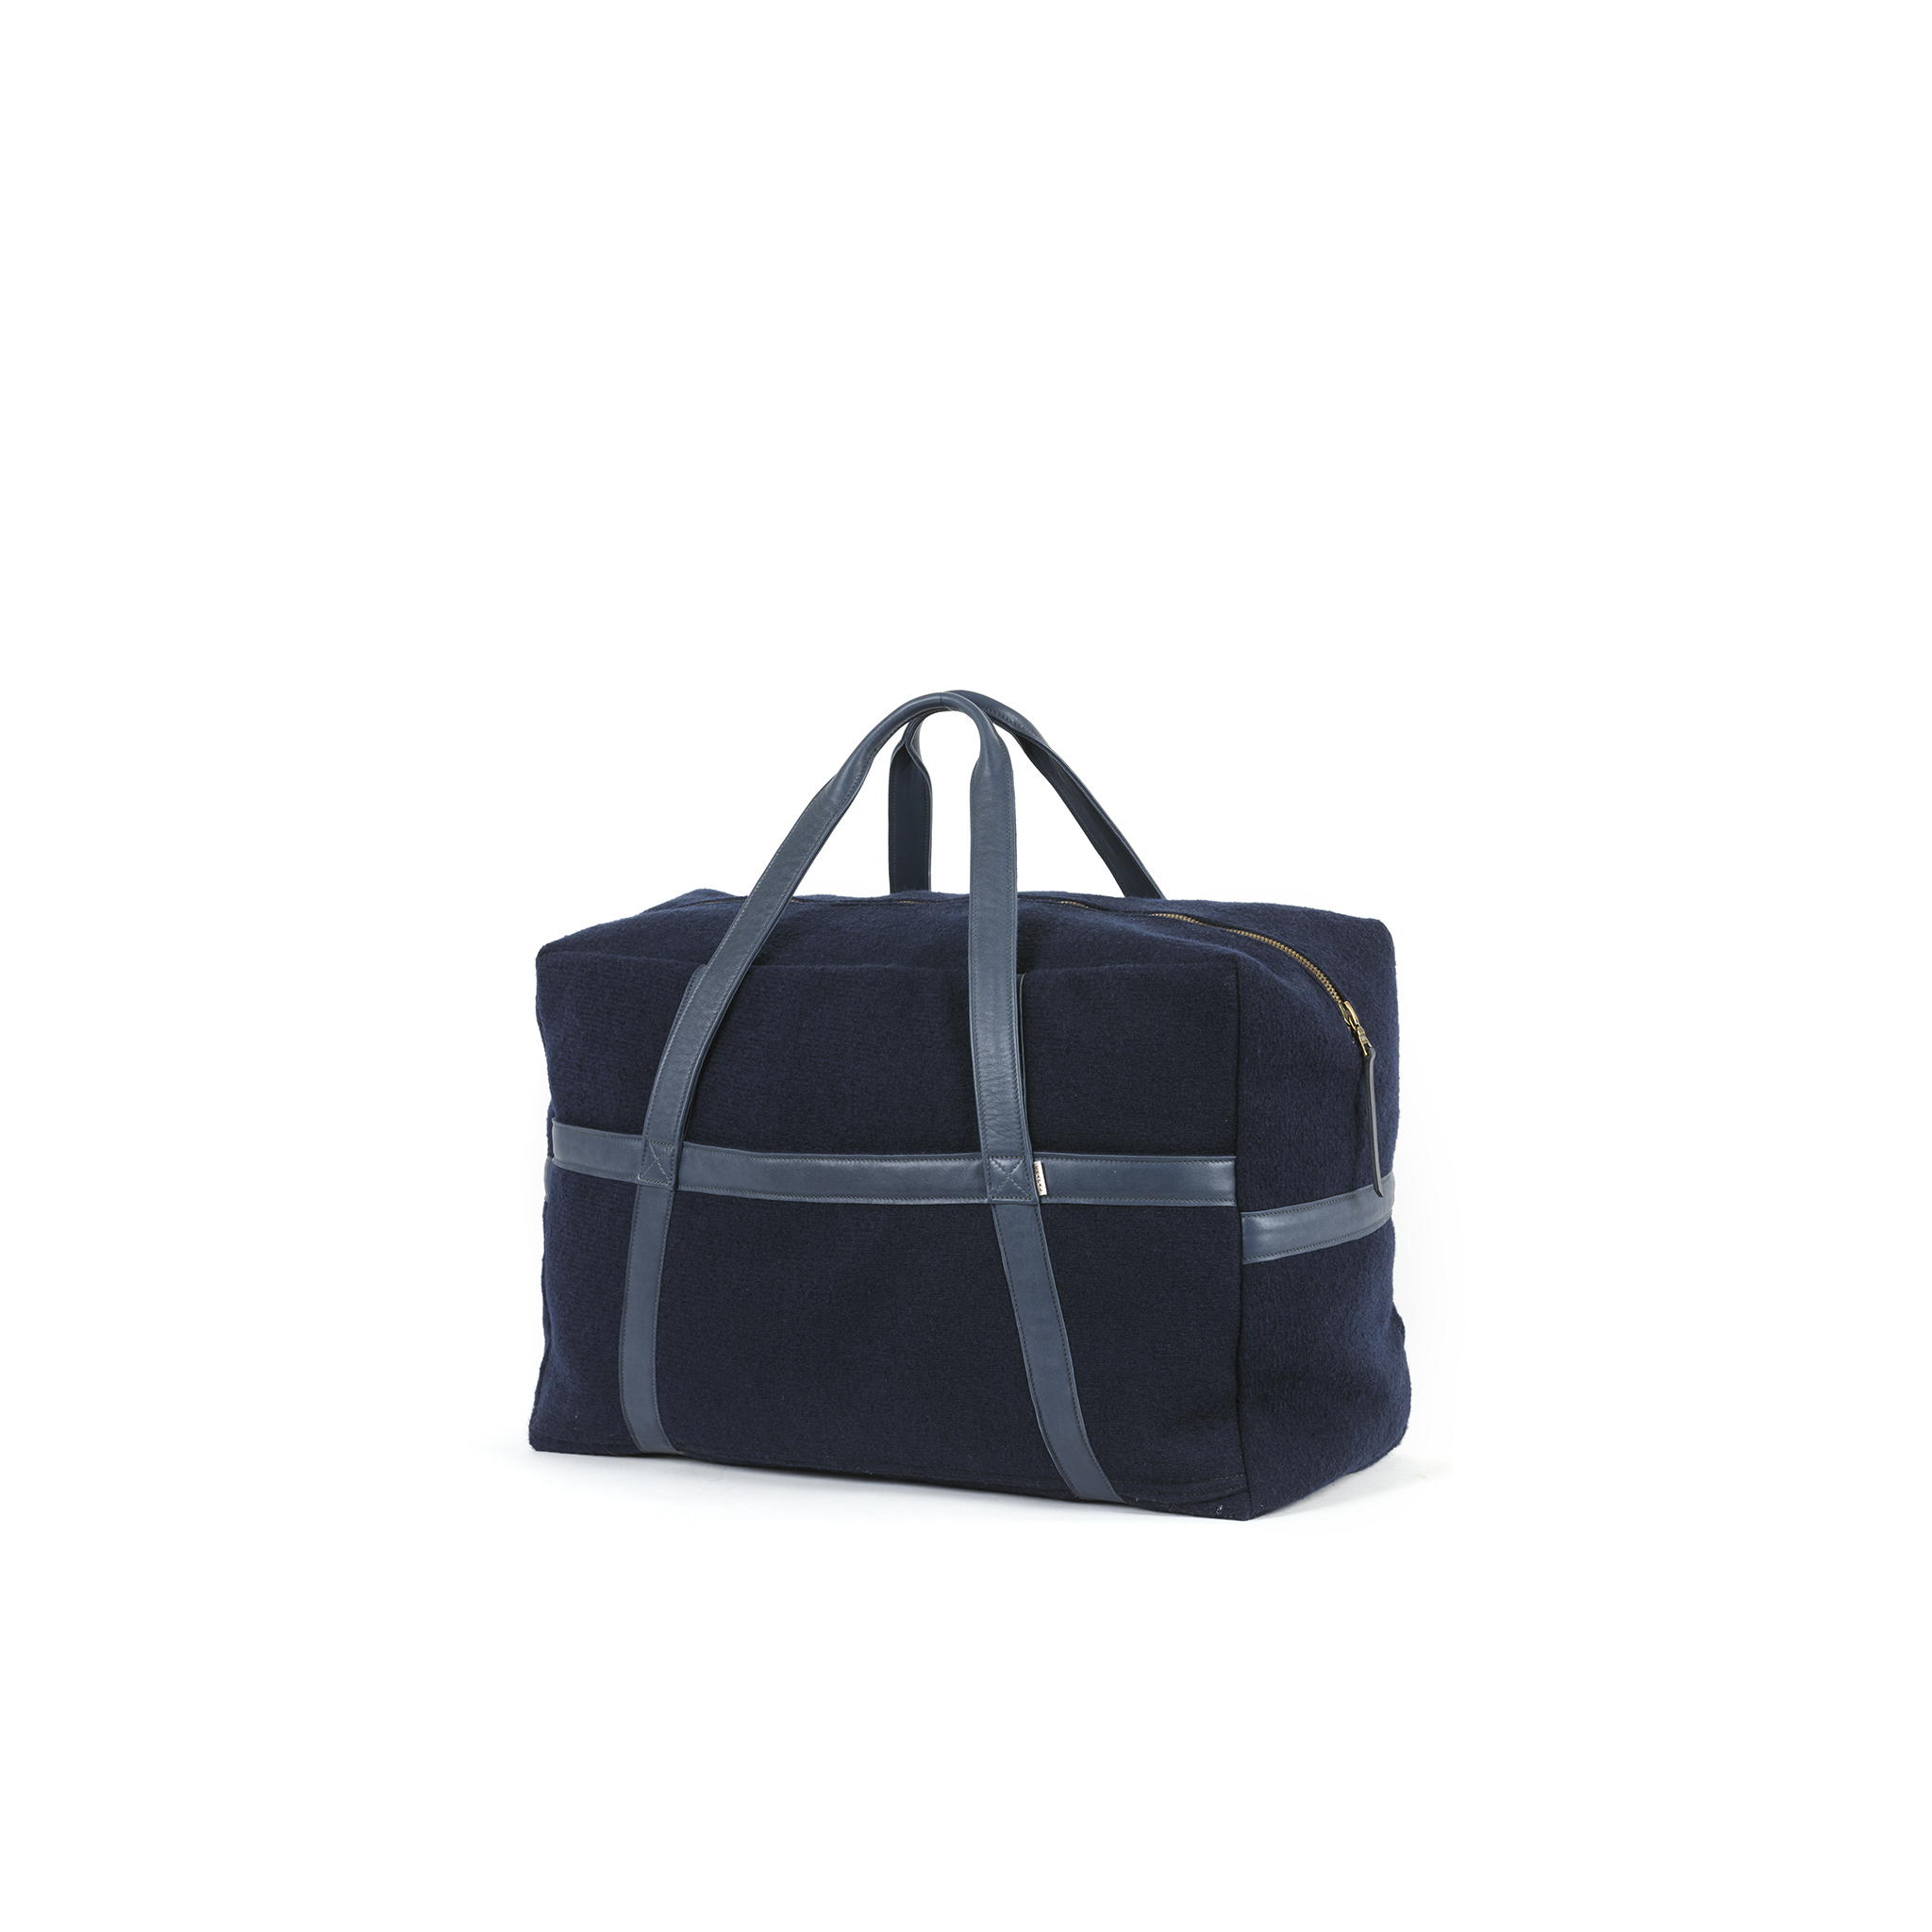 Medium Soft Bag - Merino wool and glossy leather - Blue color